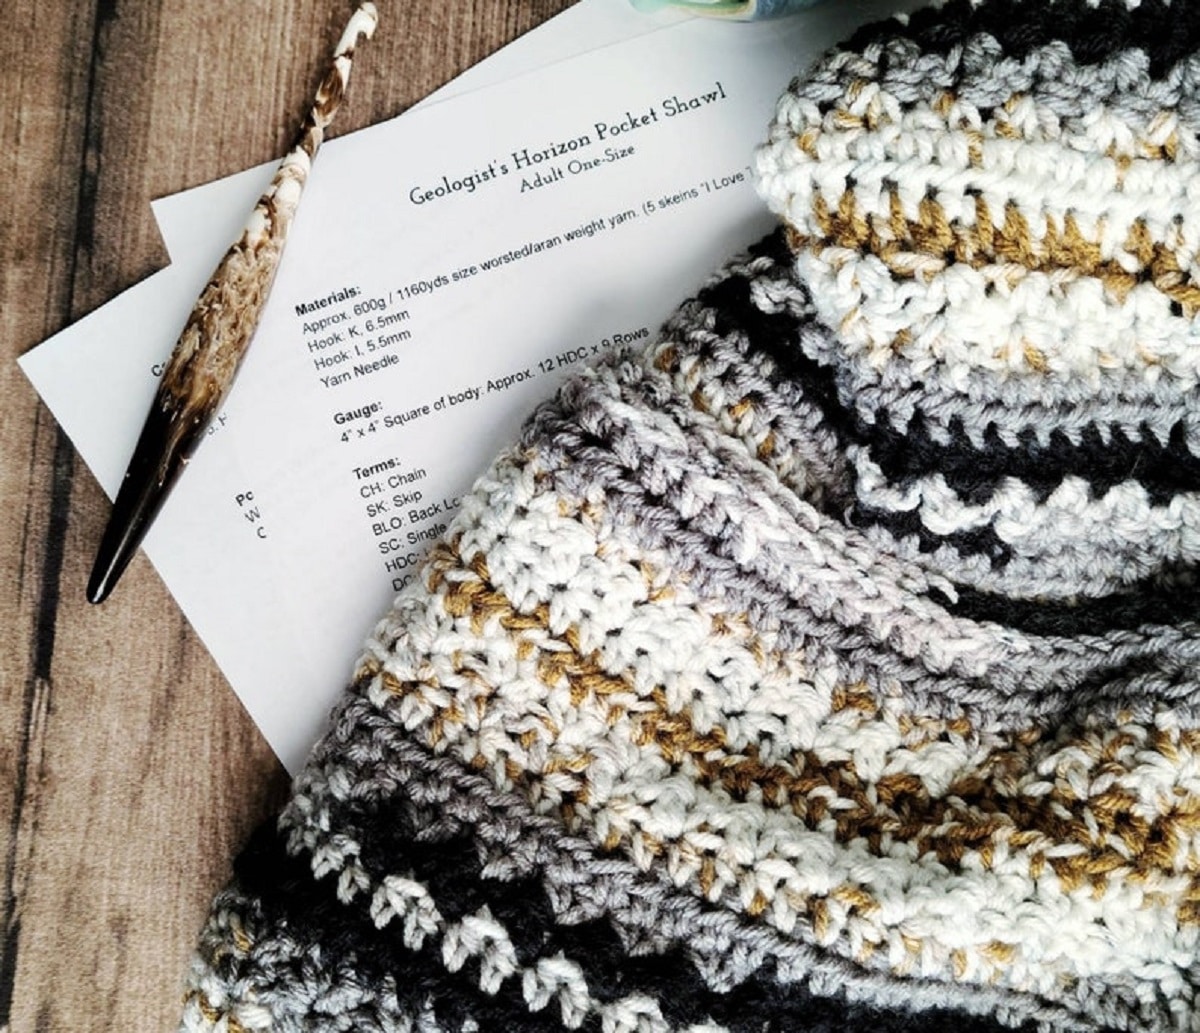 A blue, cream, yellow, and gray striped crochet shawl folded on a wooden table next to some papers and a pen.